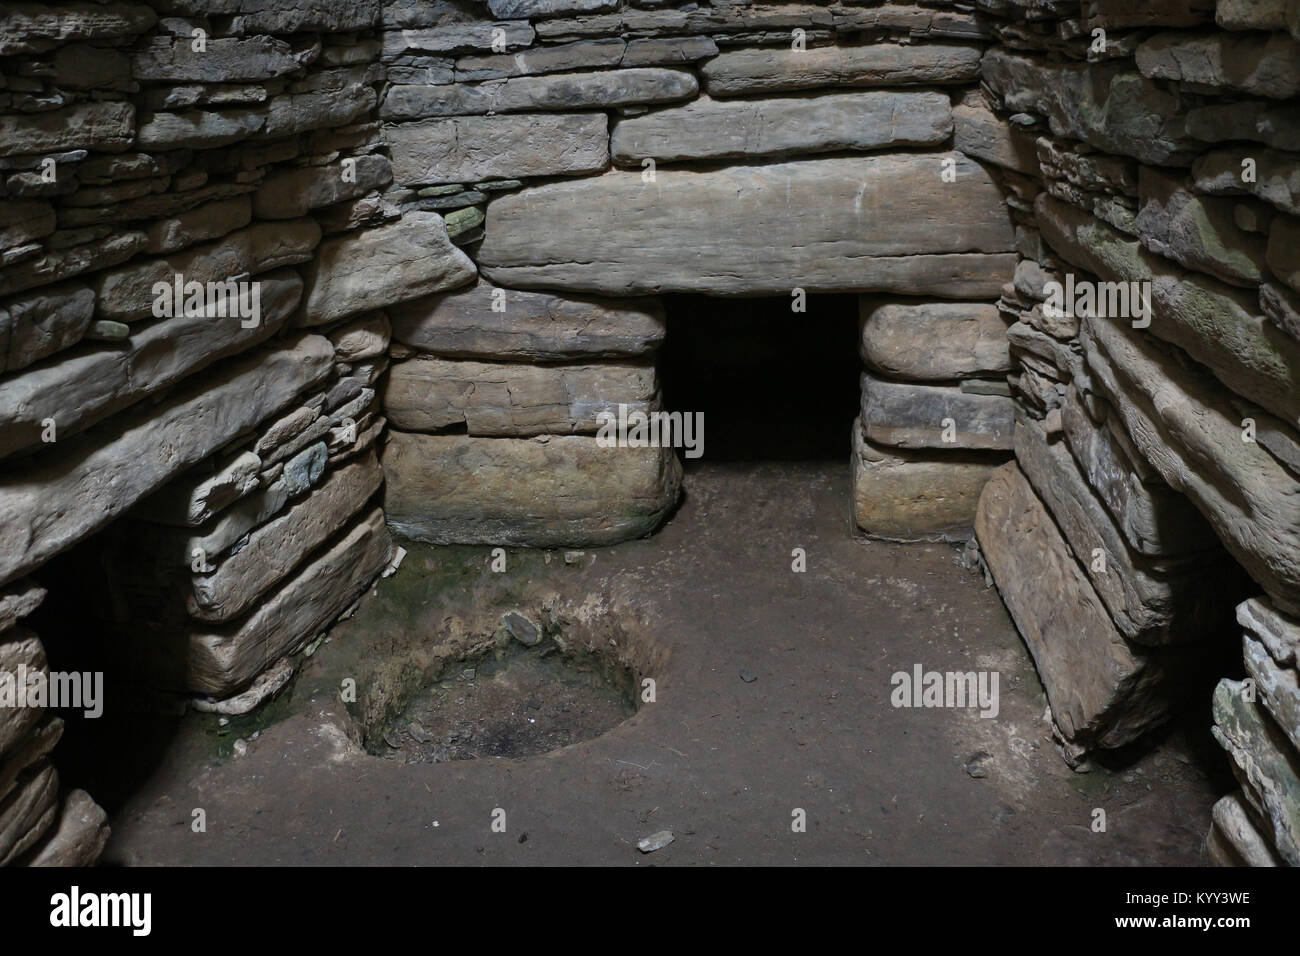 The interior main chamber of Quoyness cairn, located on Sanday Island in Orkney, Scotland. Entrances to 3 of the 6 side cells can be seen here. Stock Photo